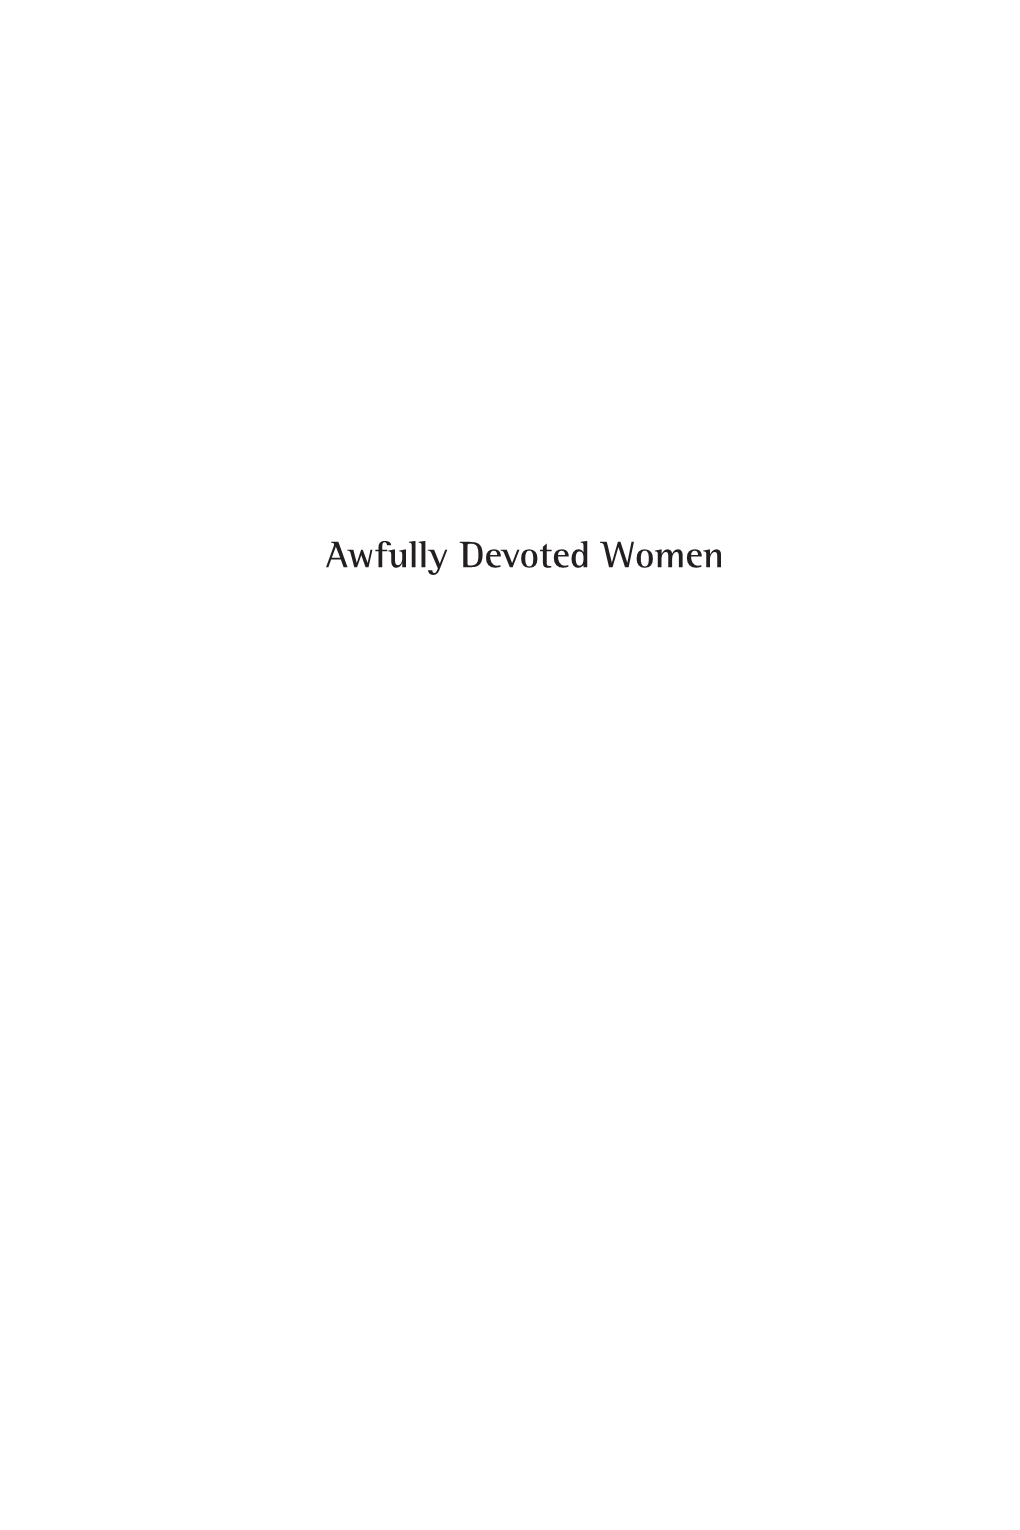 Awfully Devoted Women